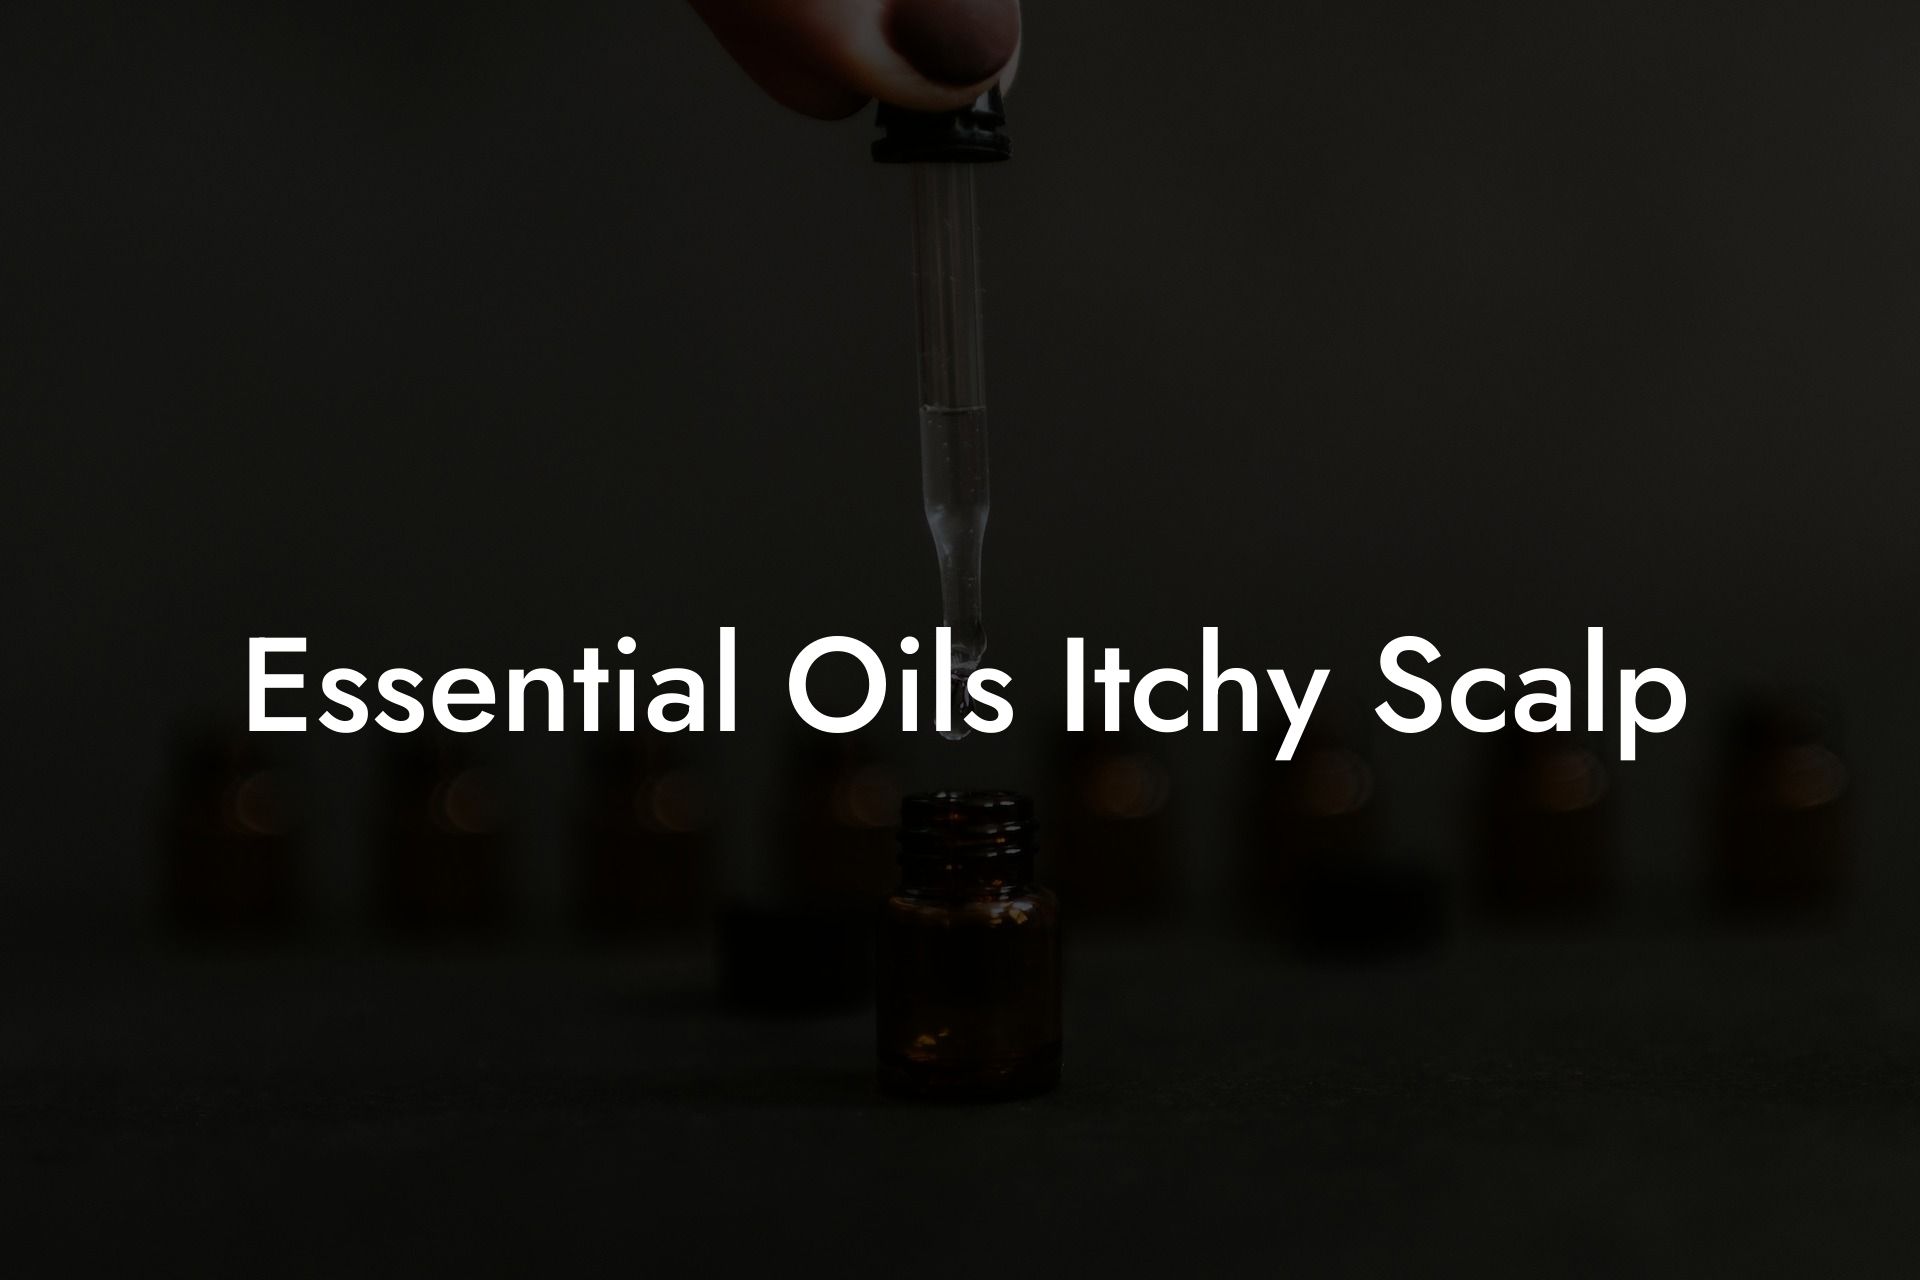 Essential Oils Itchy Scalp